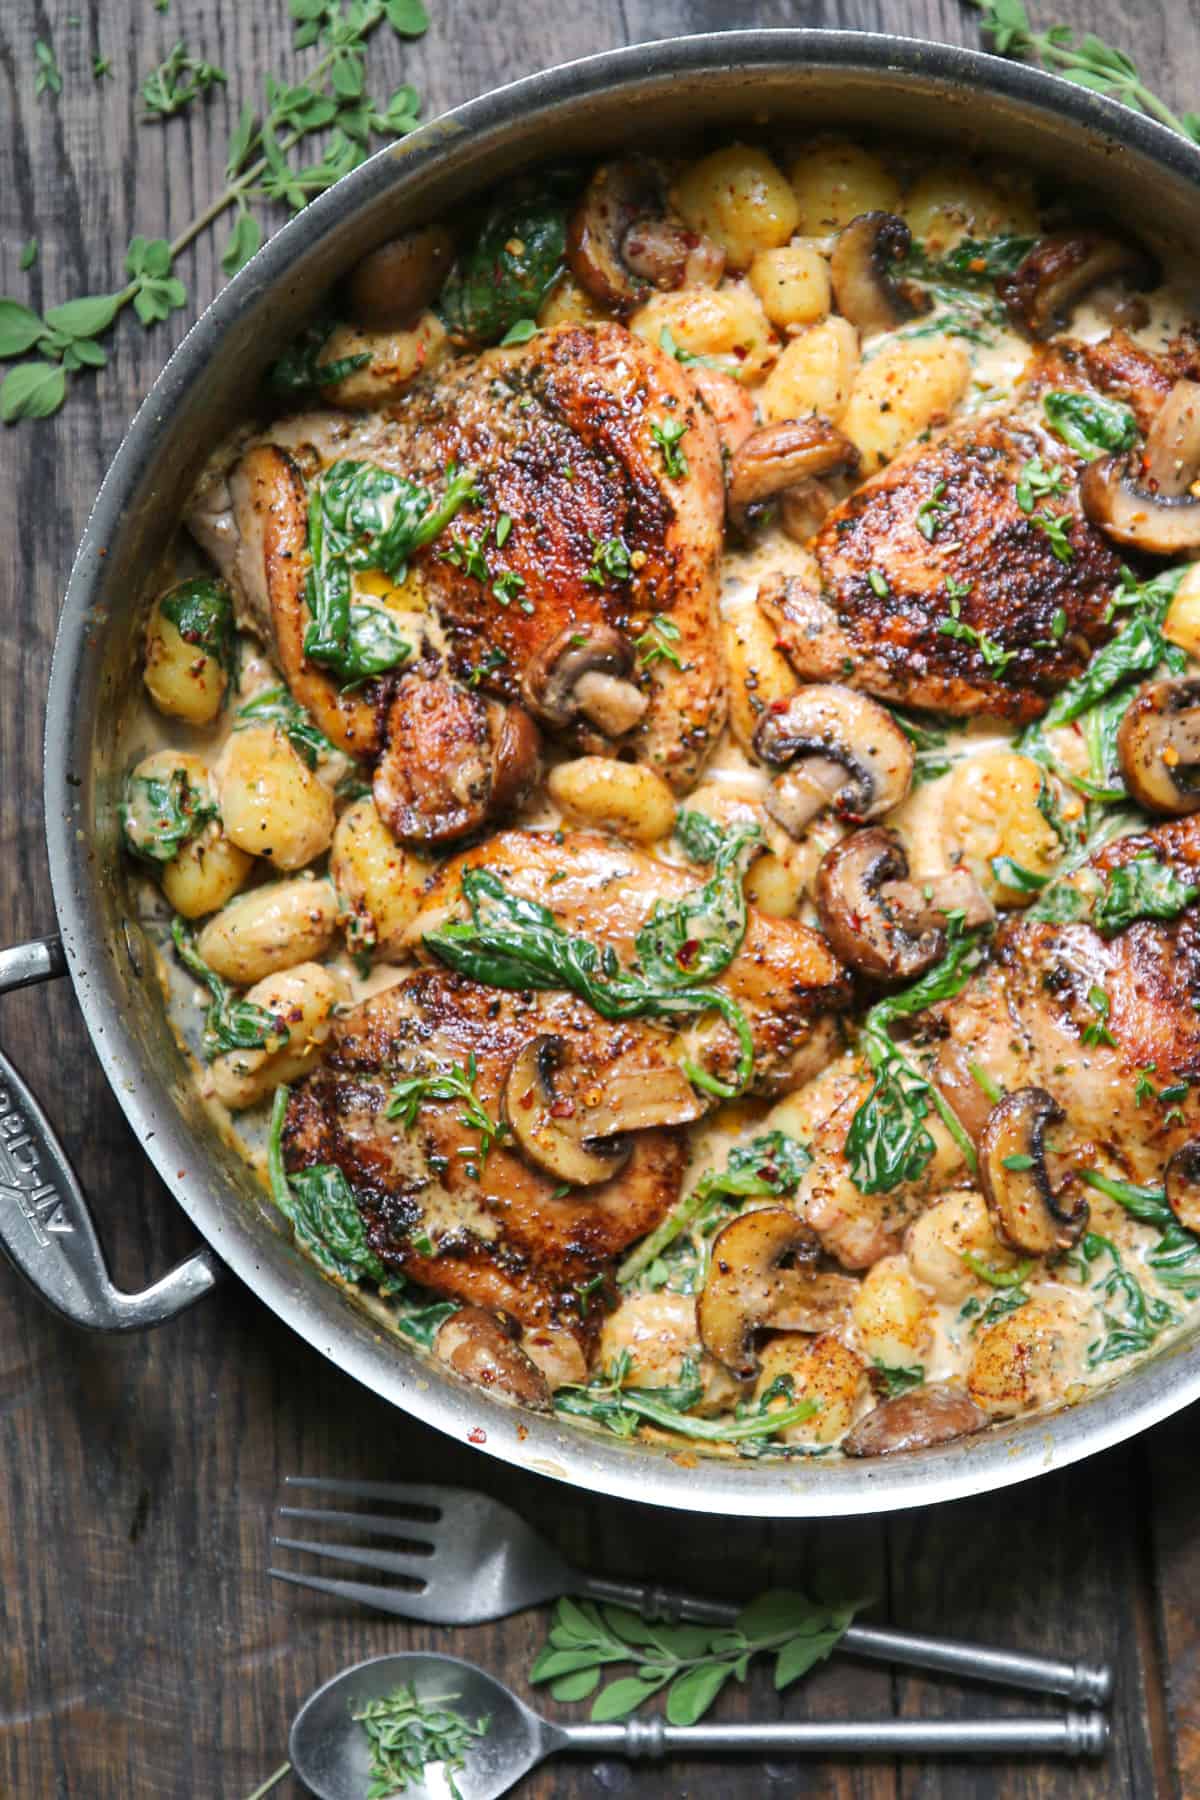 Creamy Chicken Gnocchi with Spinach and Mushrooms in a stainless steel pan.